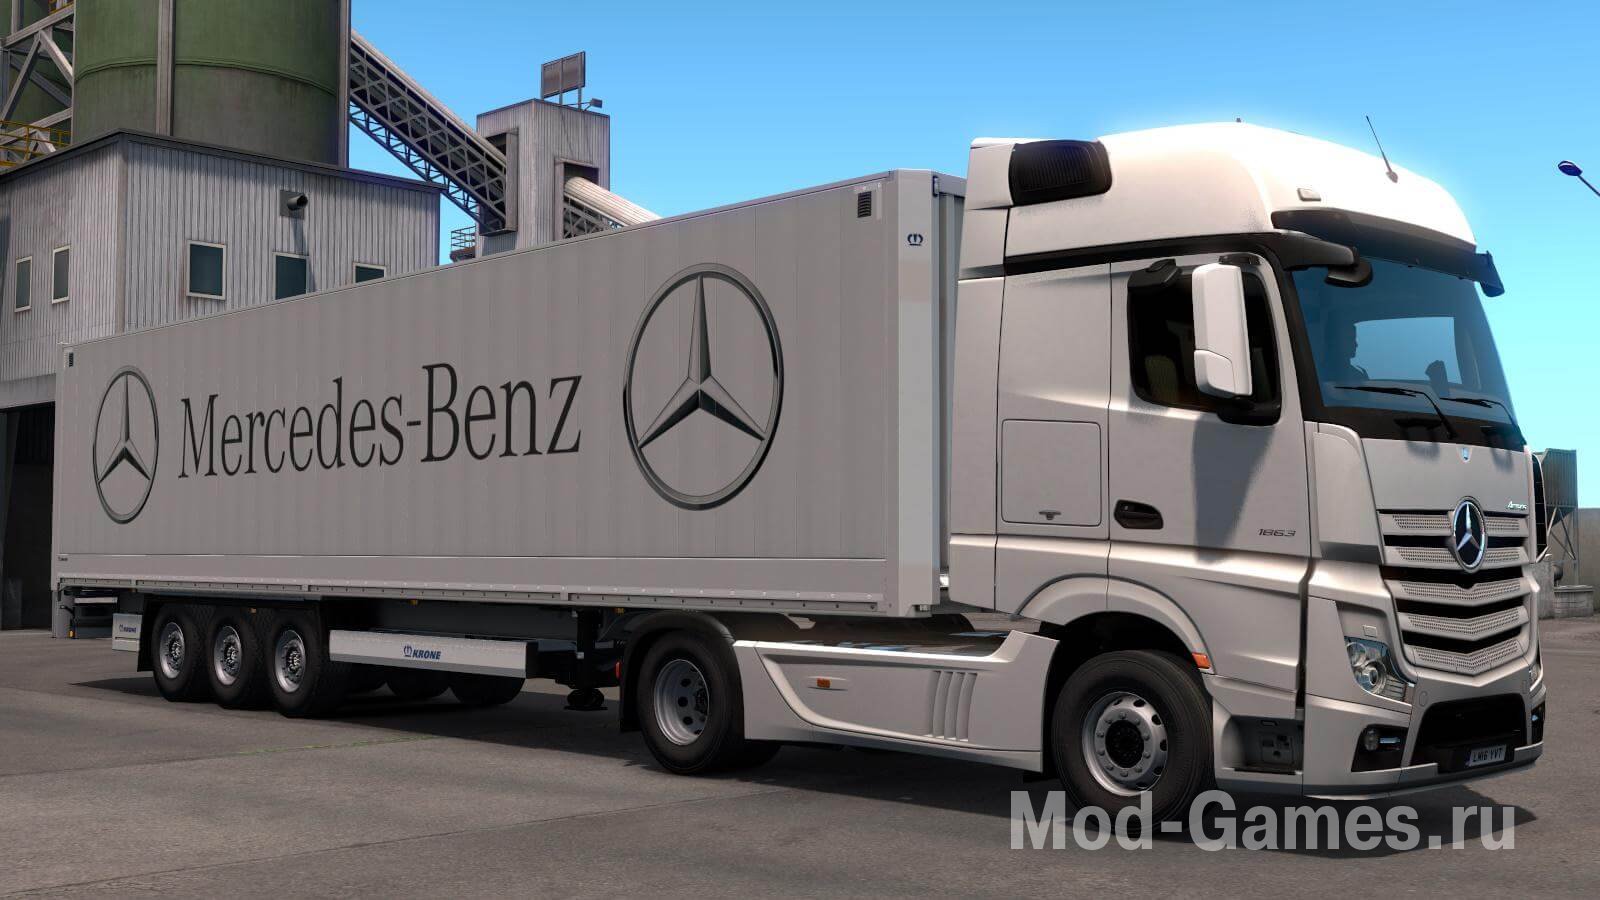 Trucks Brands Skins For All Owned Trailers